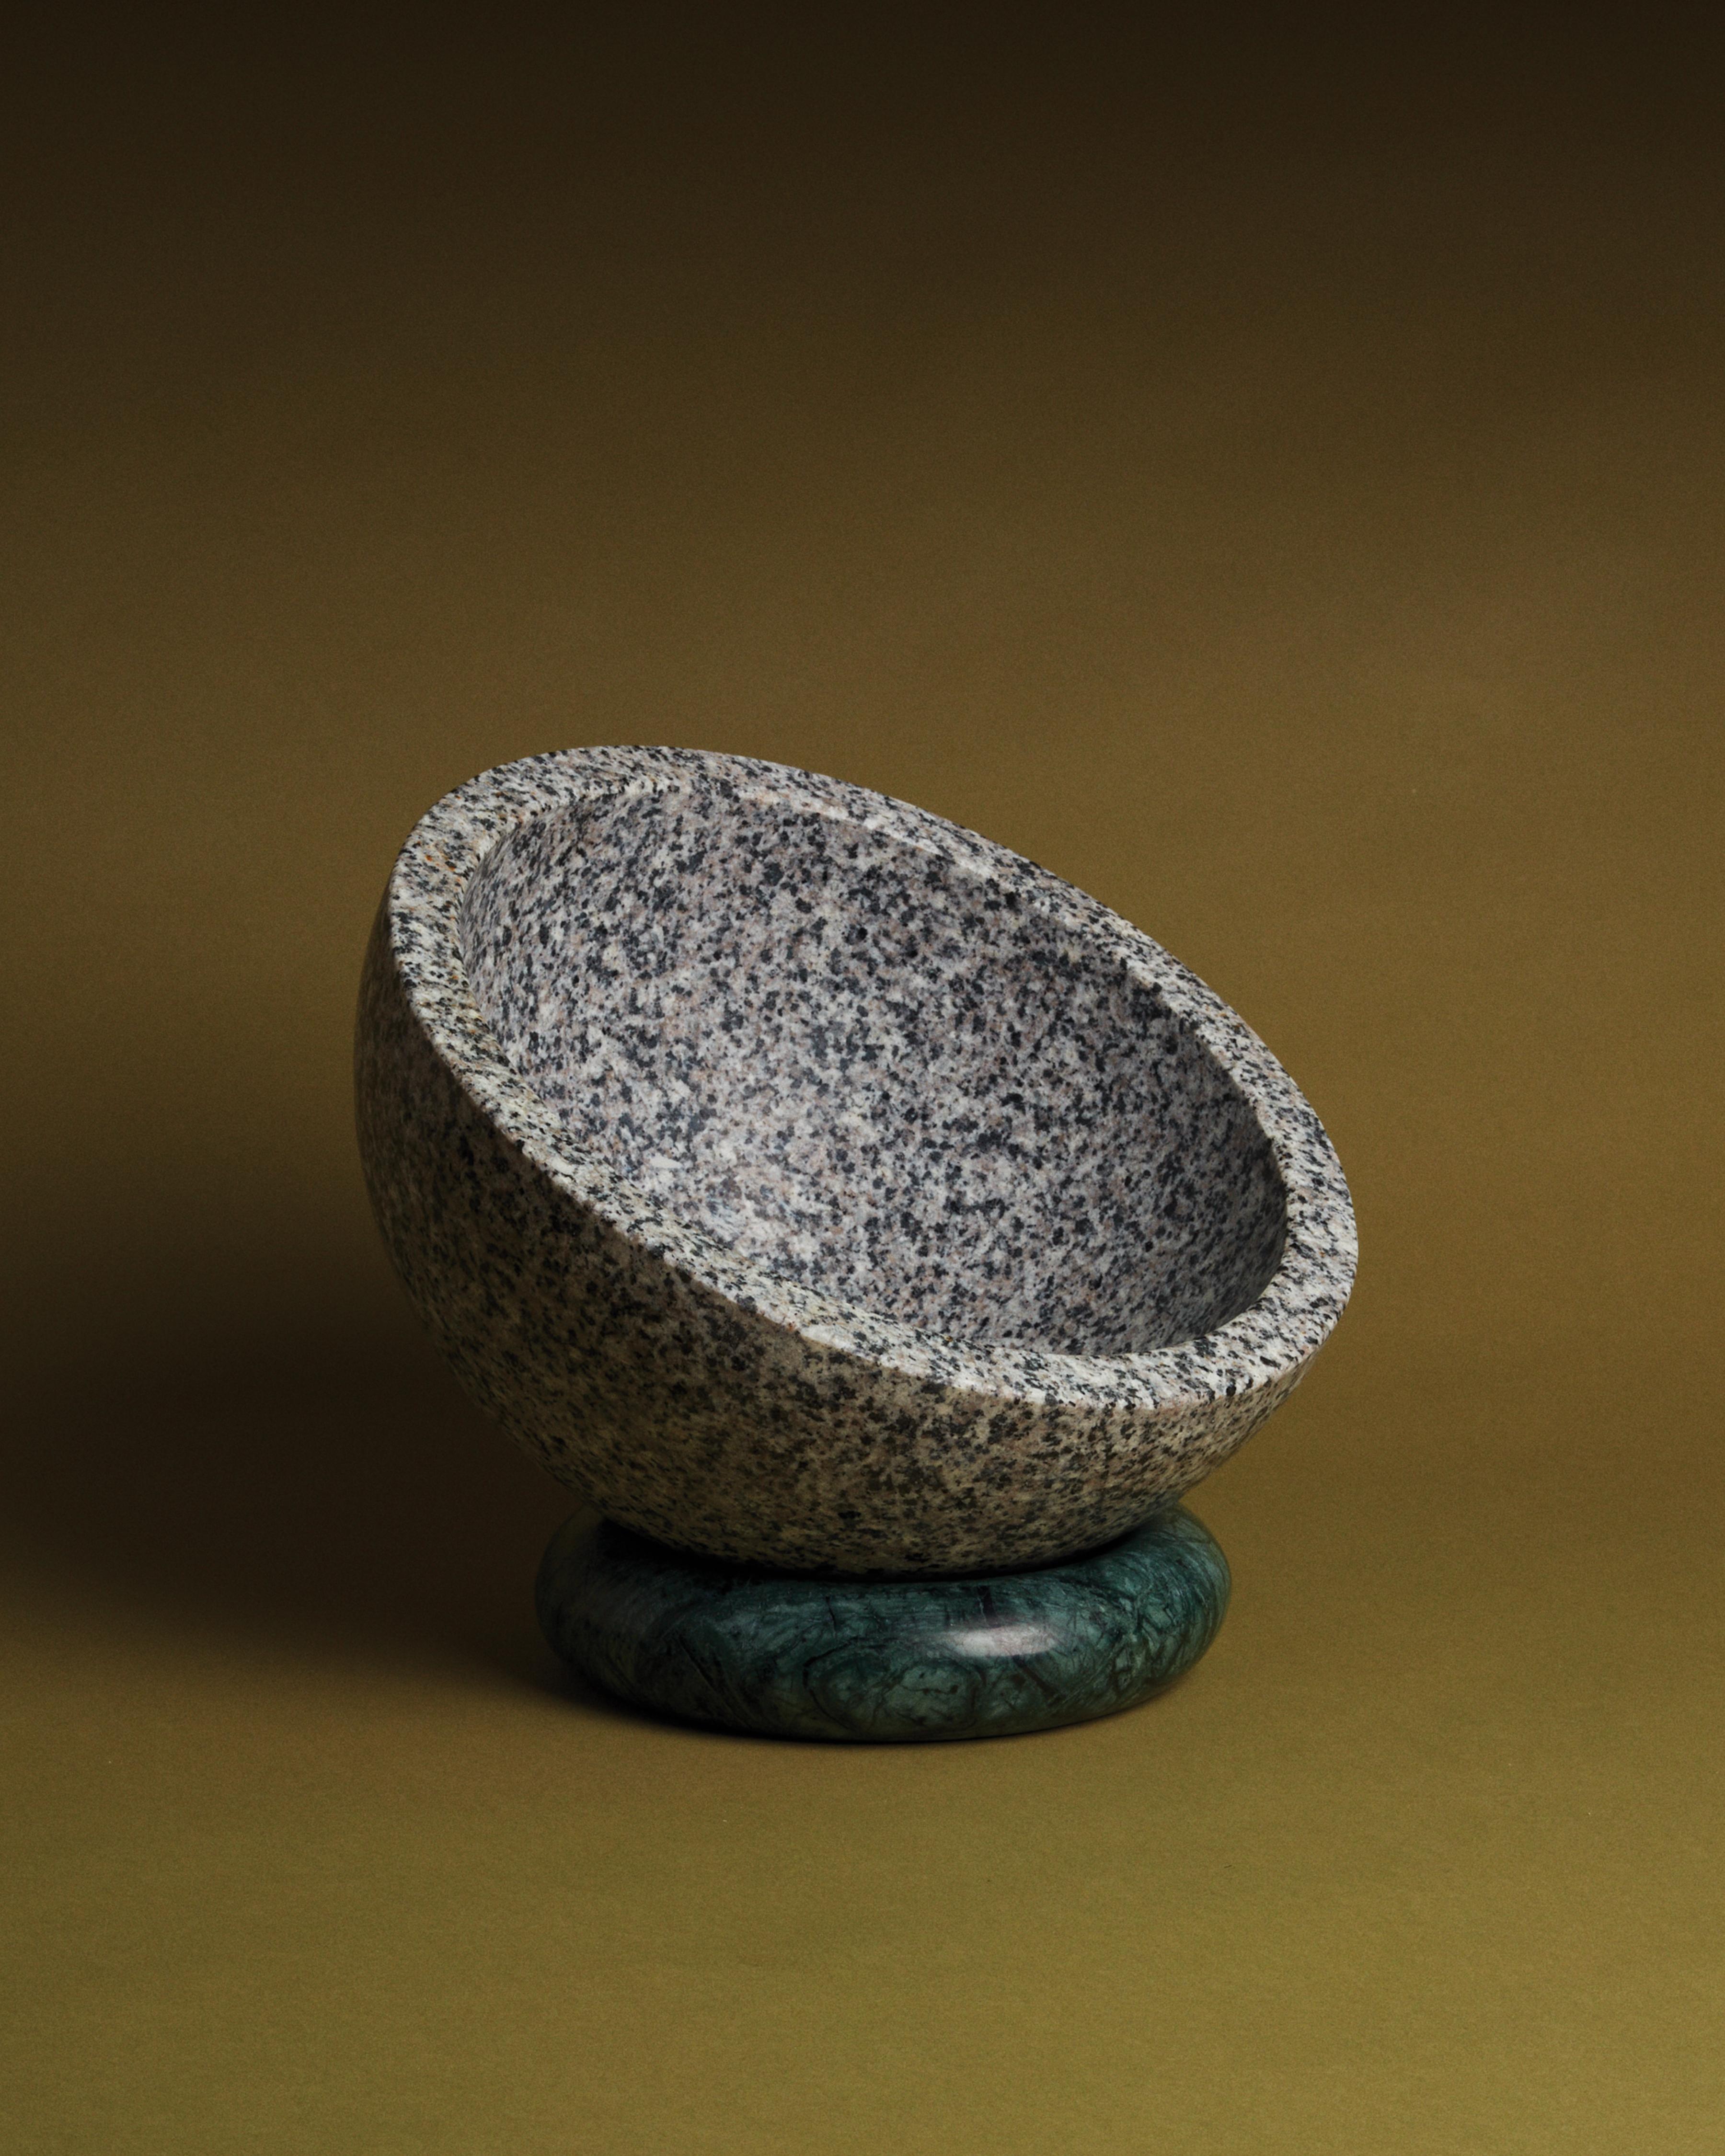 Roost bowl is a speckled granite bowl that rests on top of its marble donut base. The bowl can be turned and tilted, angled to dis- play its contents, objects, fruits and vegetables. Disassembled, it can become sculptural objects and the donut can